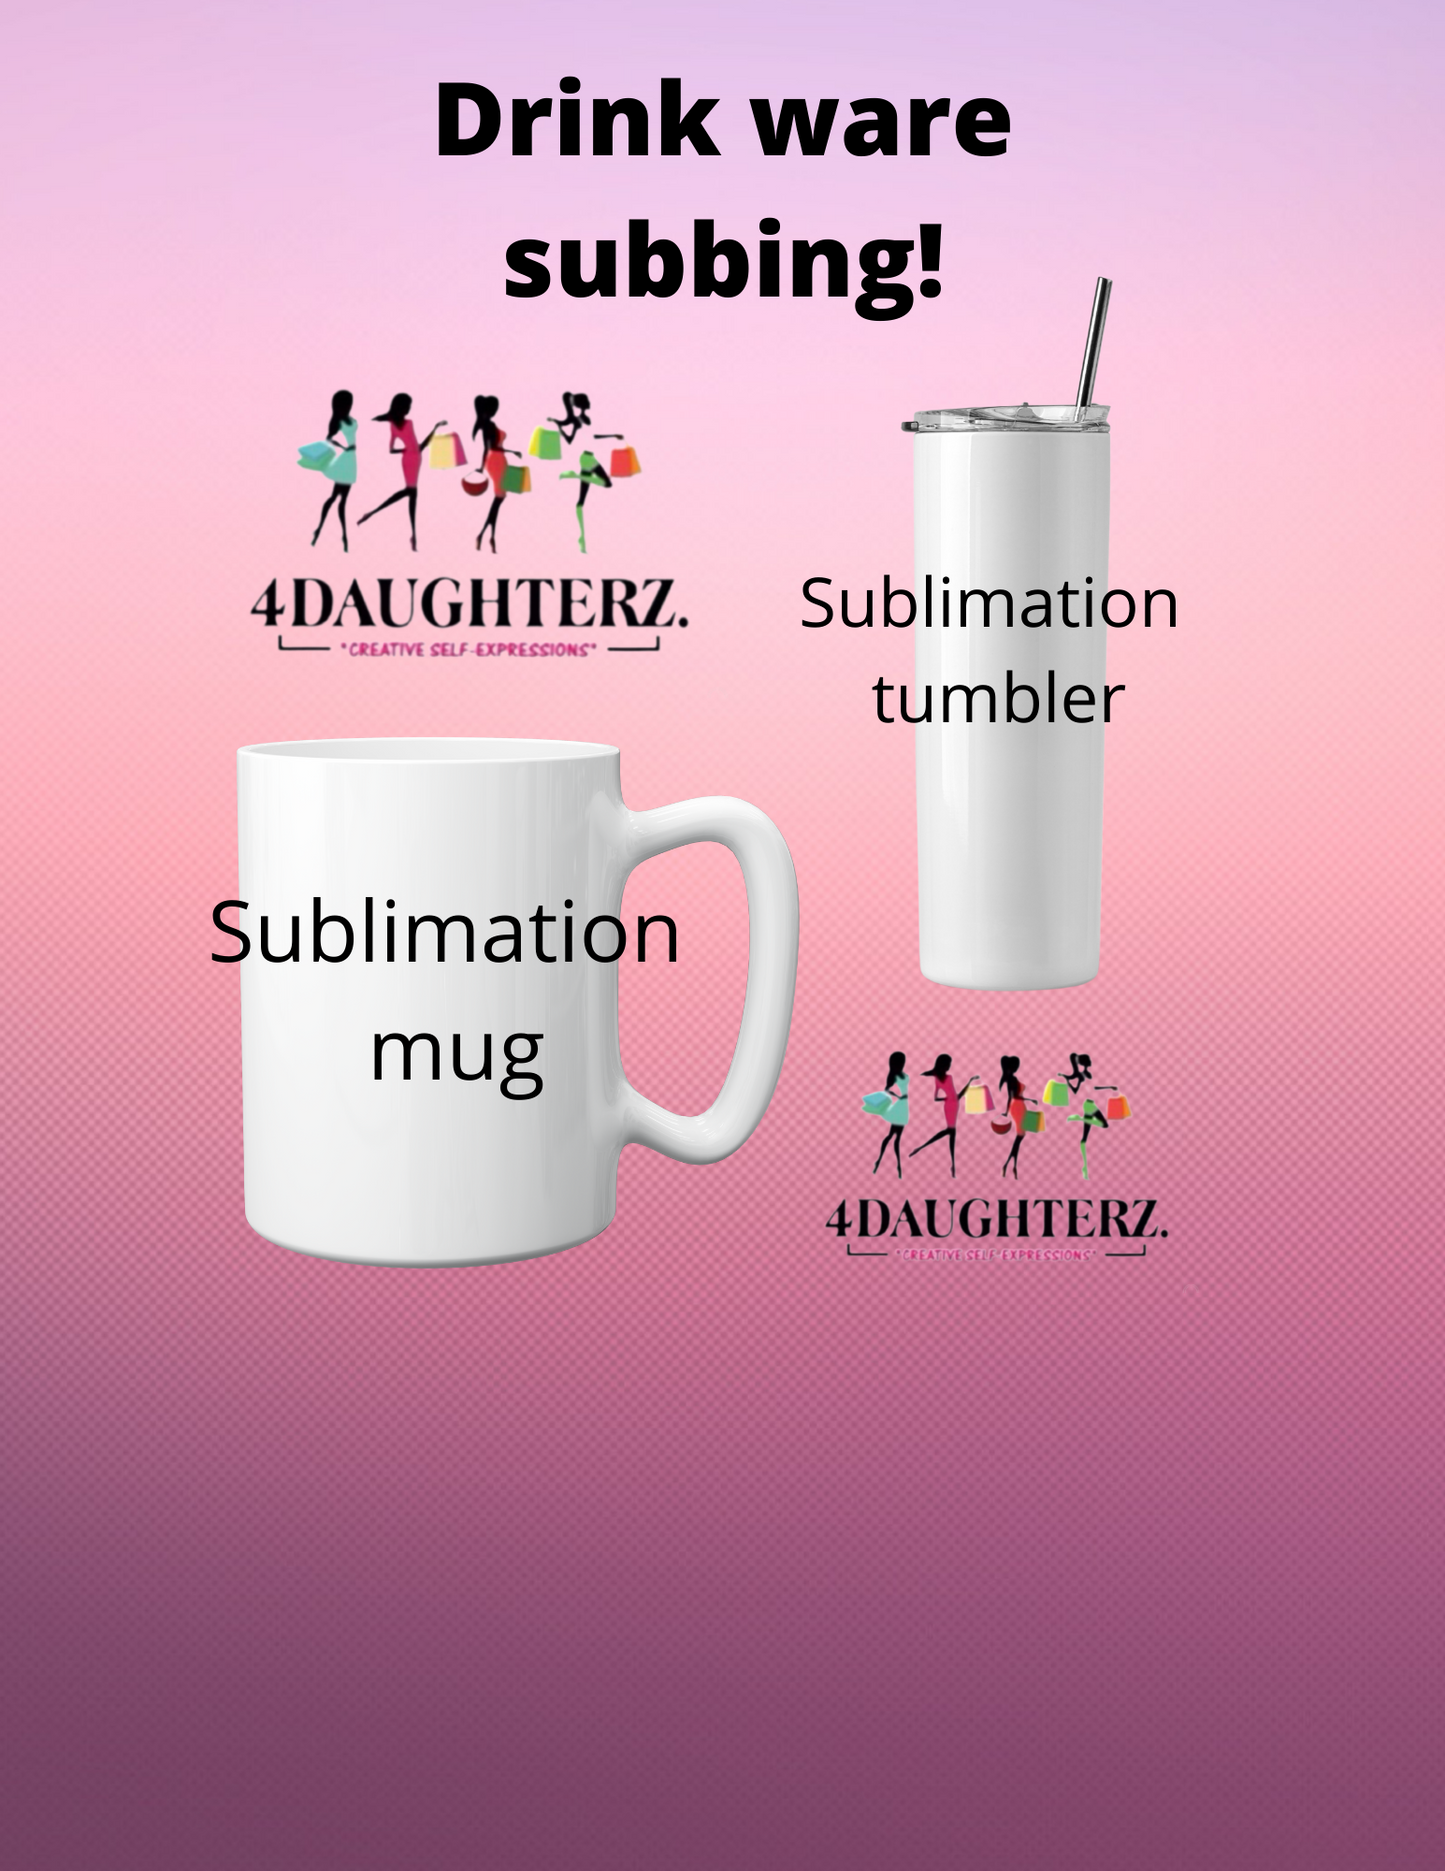 Subbing a mug and tumbler 101 (in person) 1:1 class